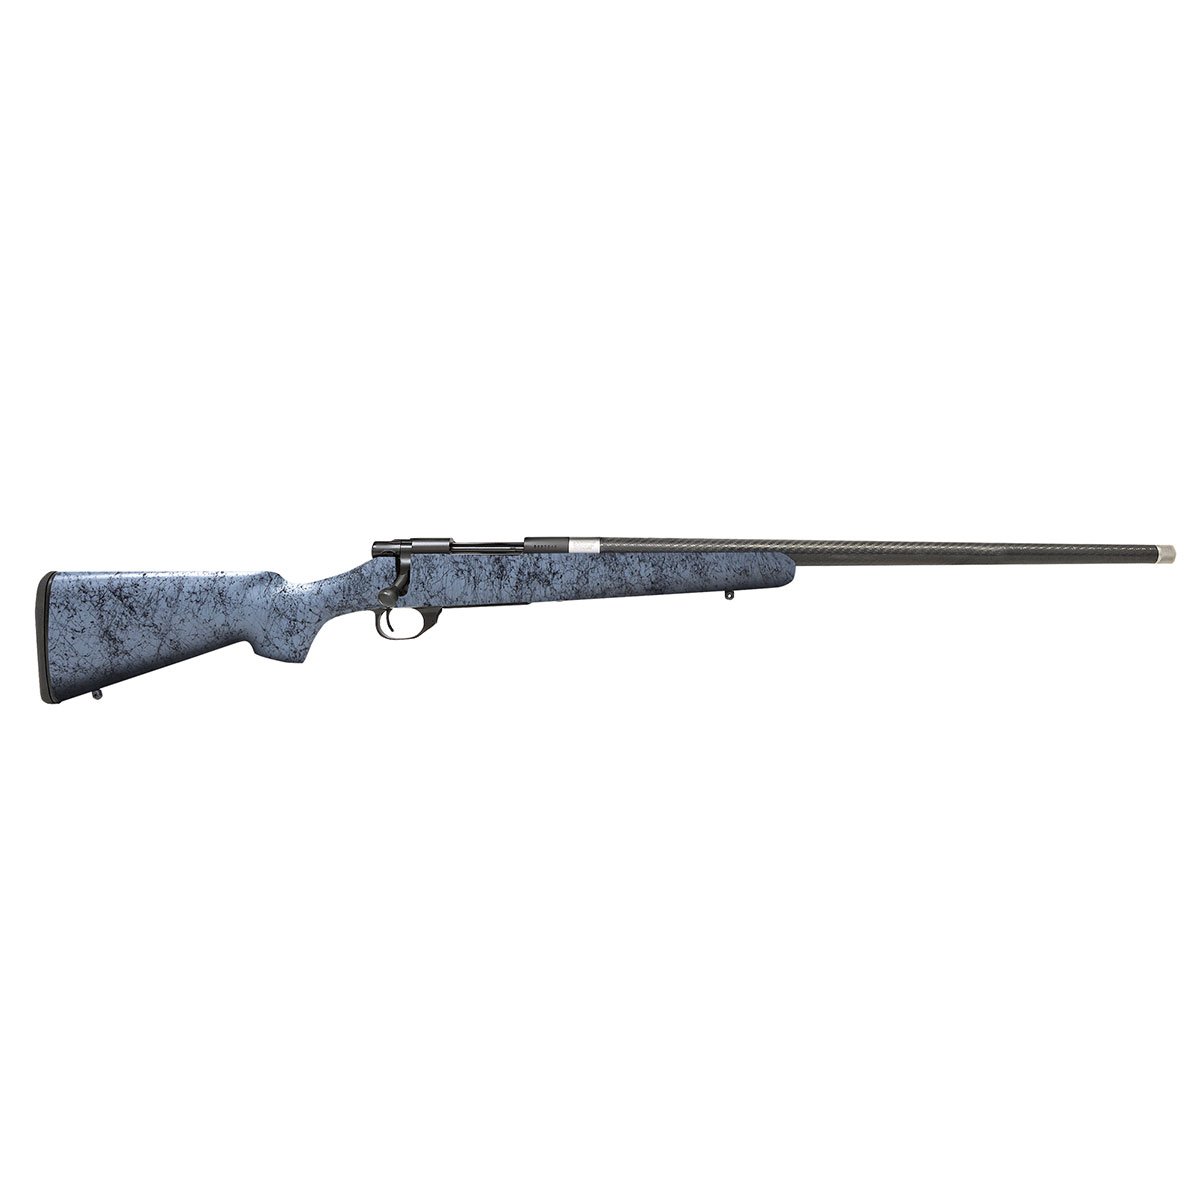 HOWA - M1500 CARBON ELEVATE 6MM ARC BOLT-ACTION RIFLE